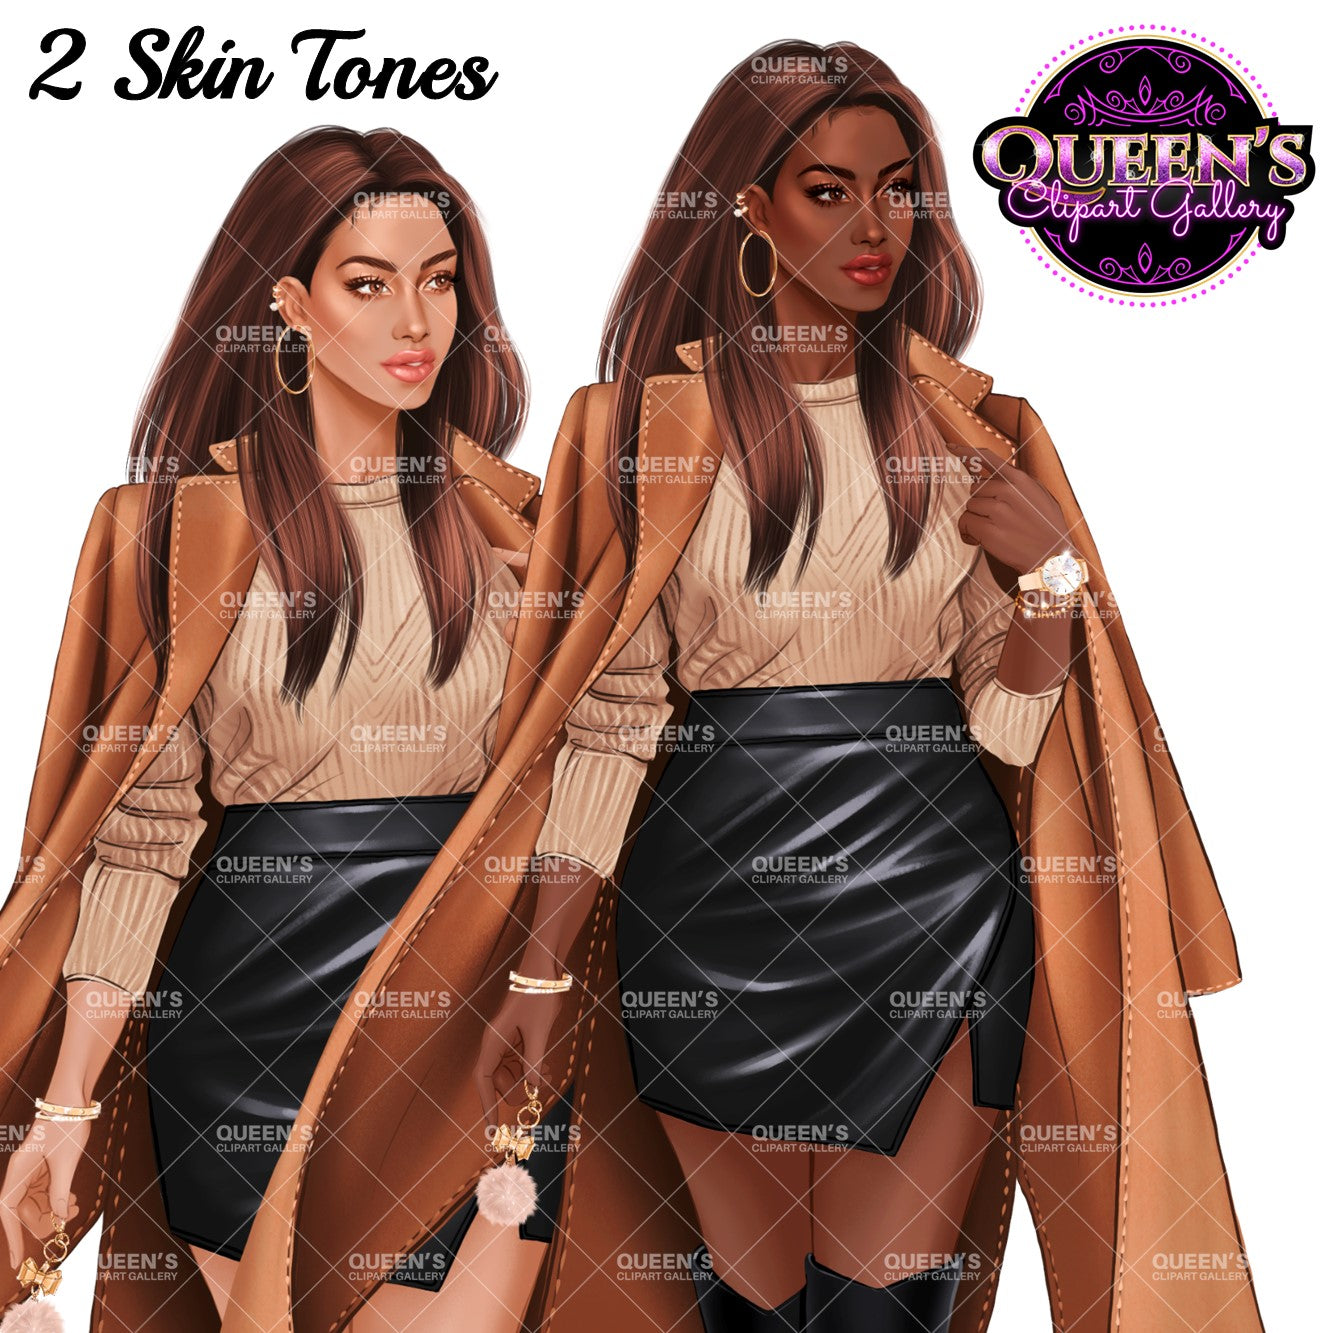 Woman in coat clipart, Fall clipart, Fashion girl clipart, Fashion illustration, Lady boss clipart, Girl boss clipart, Woman clipart, Curvy girl